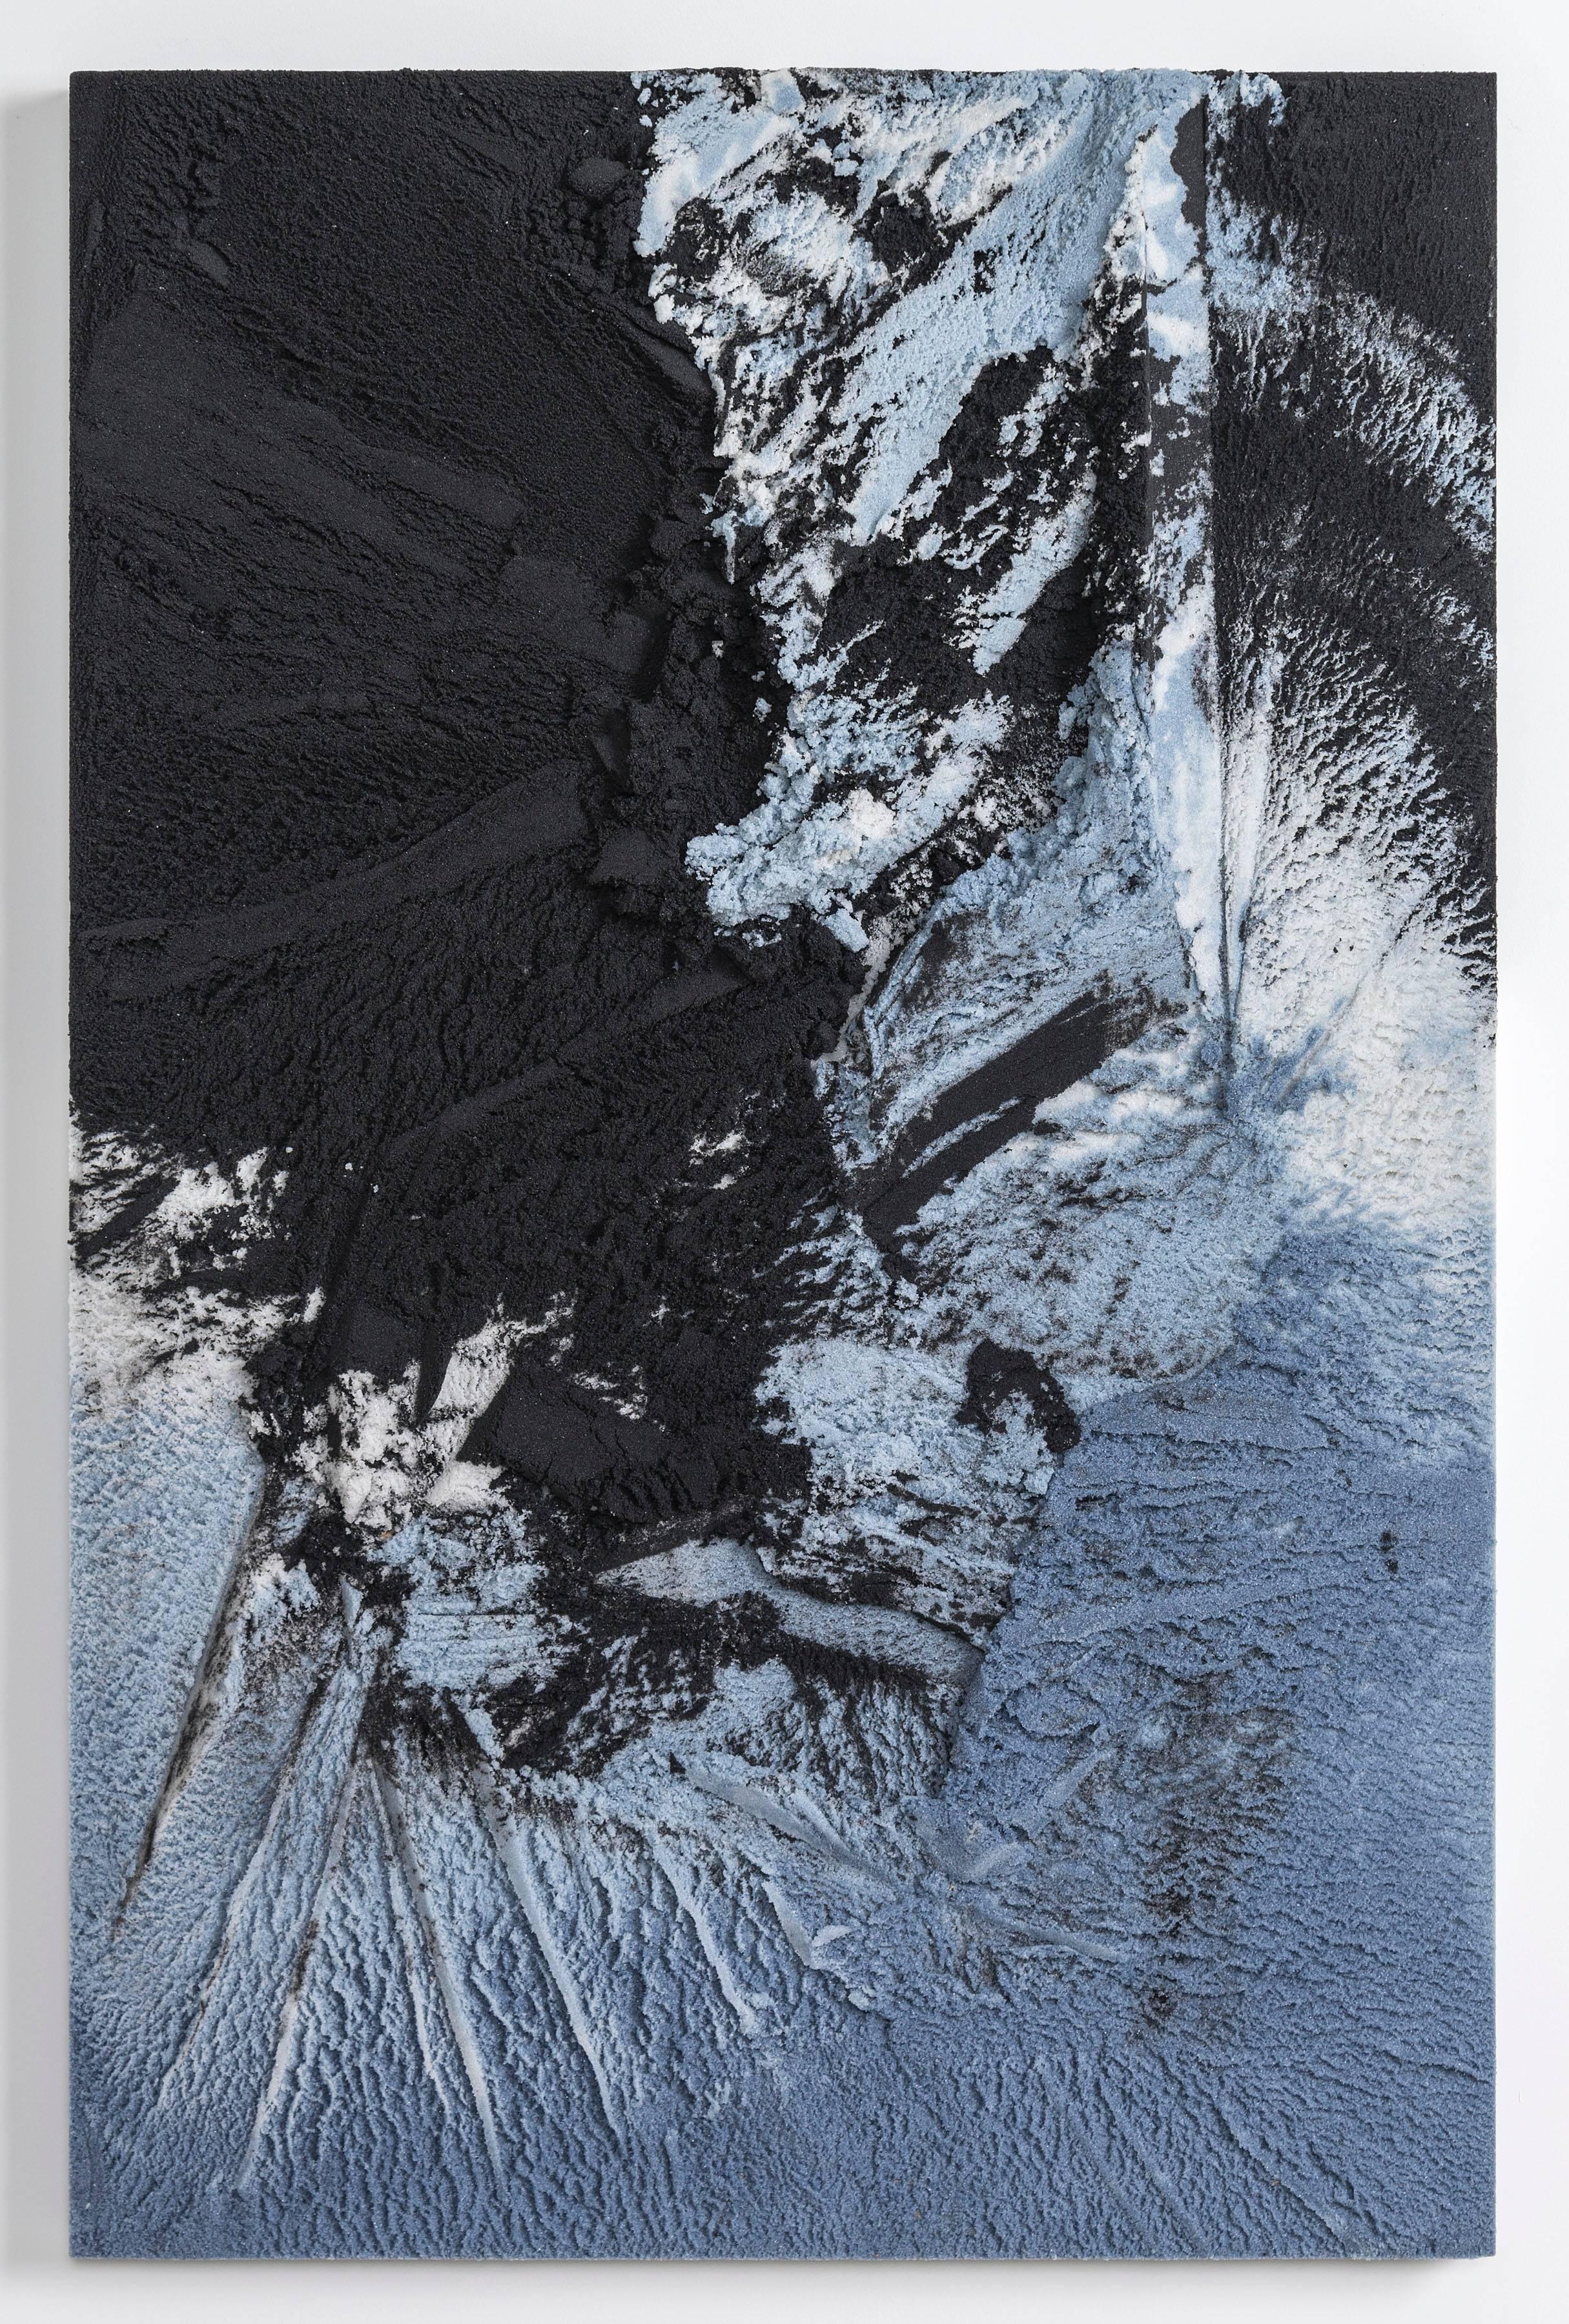 Composed in a language of landscape-oriented abstraction, the painting is made entirely from powdered glass. With hand-dyed granules in black, blue, and white tones, the materials create an effect evocative of aerial views of a rugged landscape and